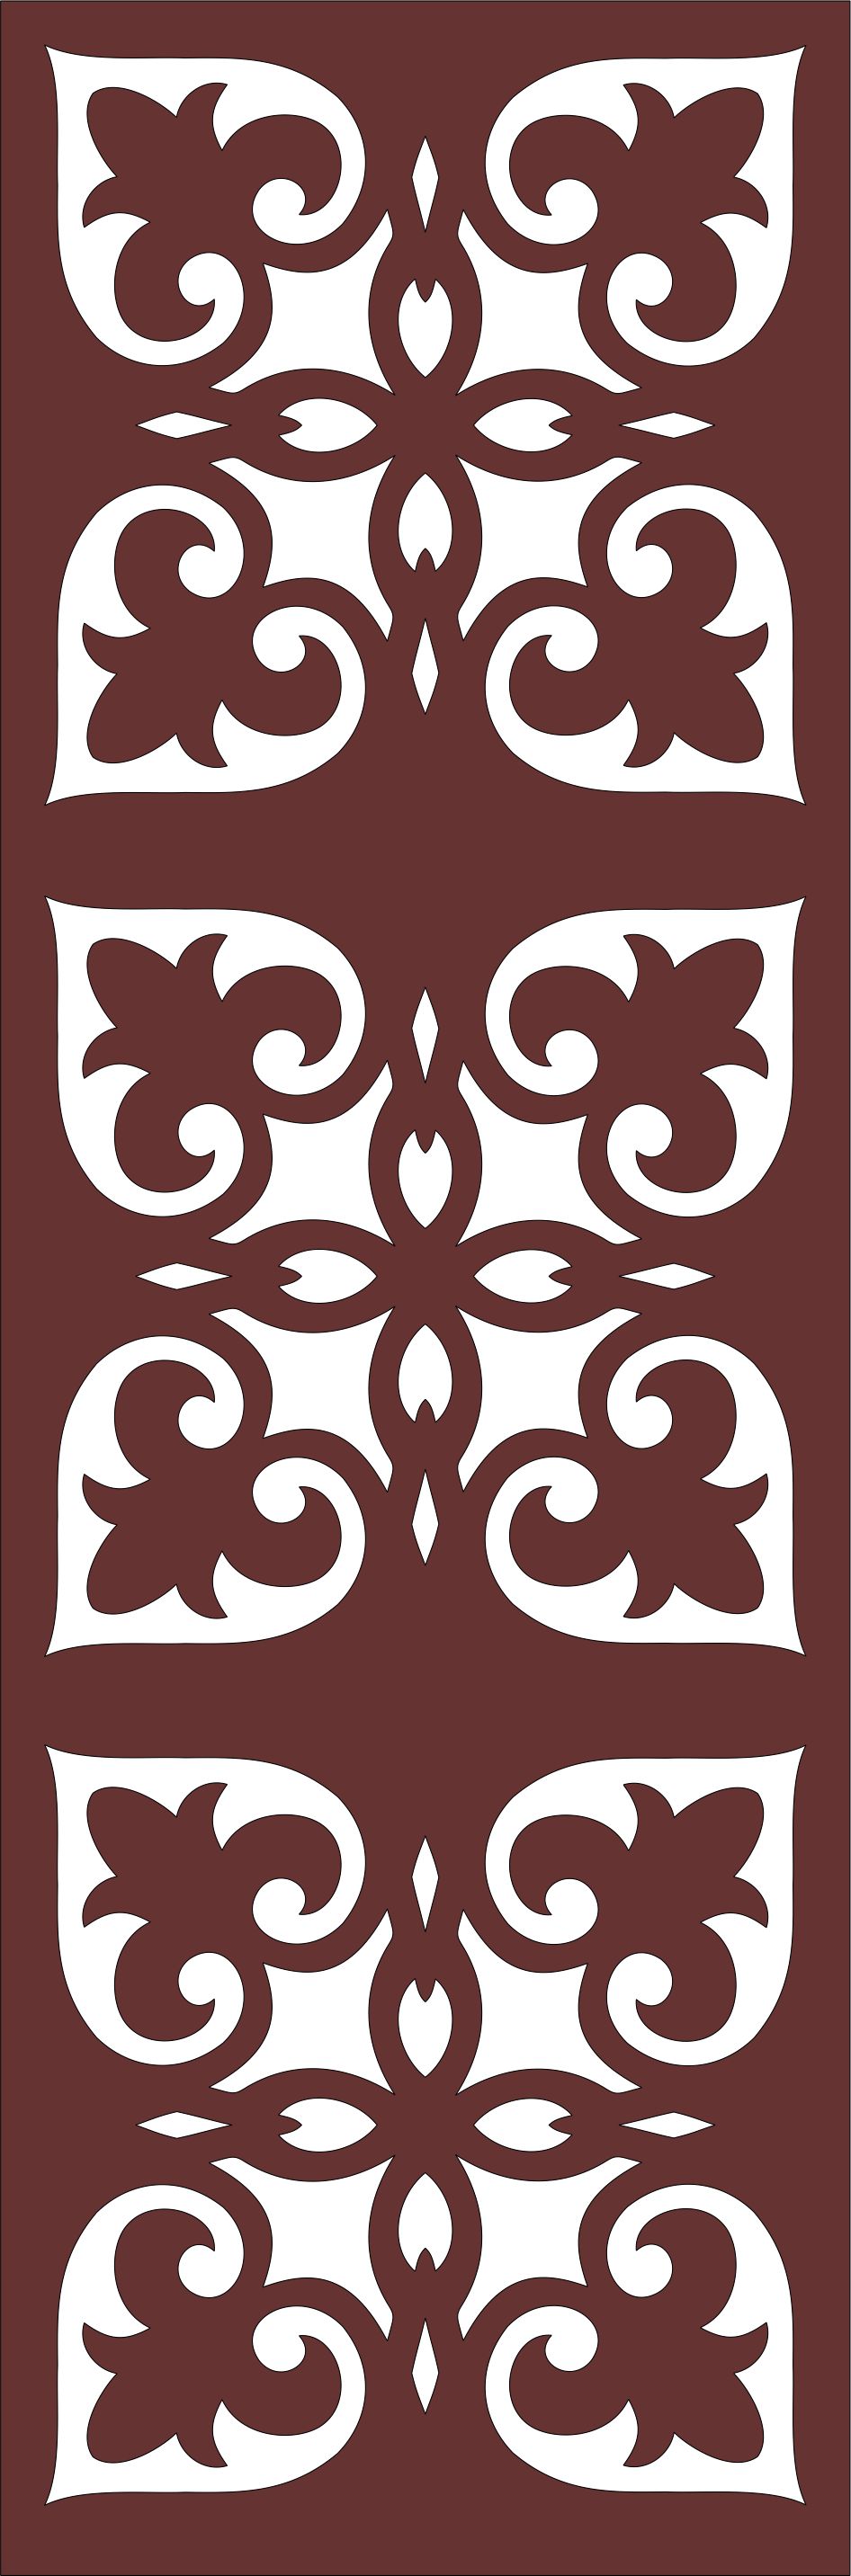 Laser Cut Separator Seamless Floral Grill Designs Free DXF File